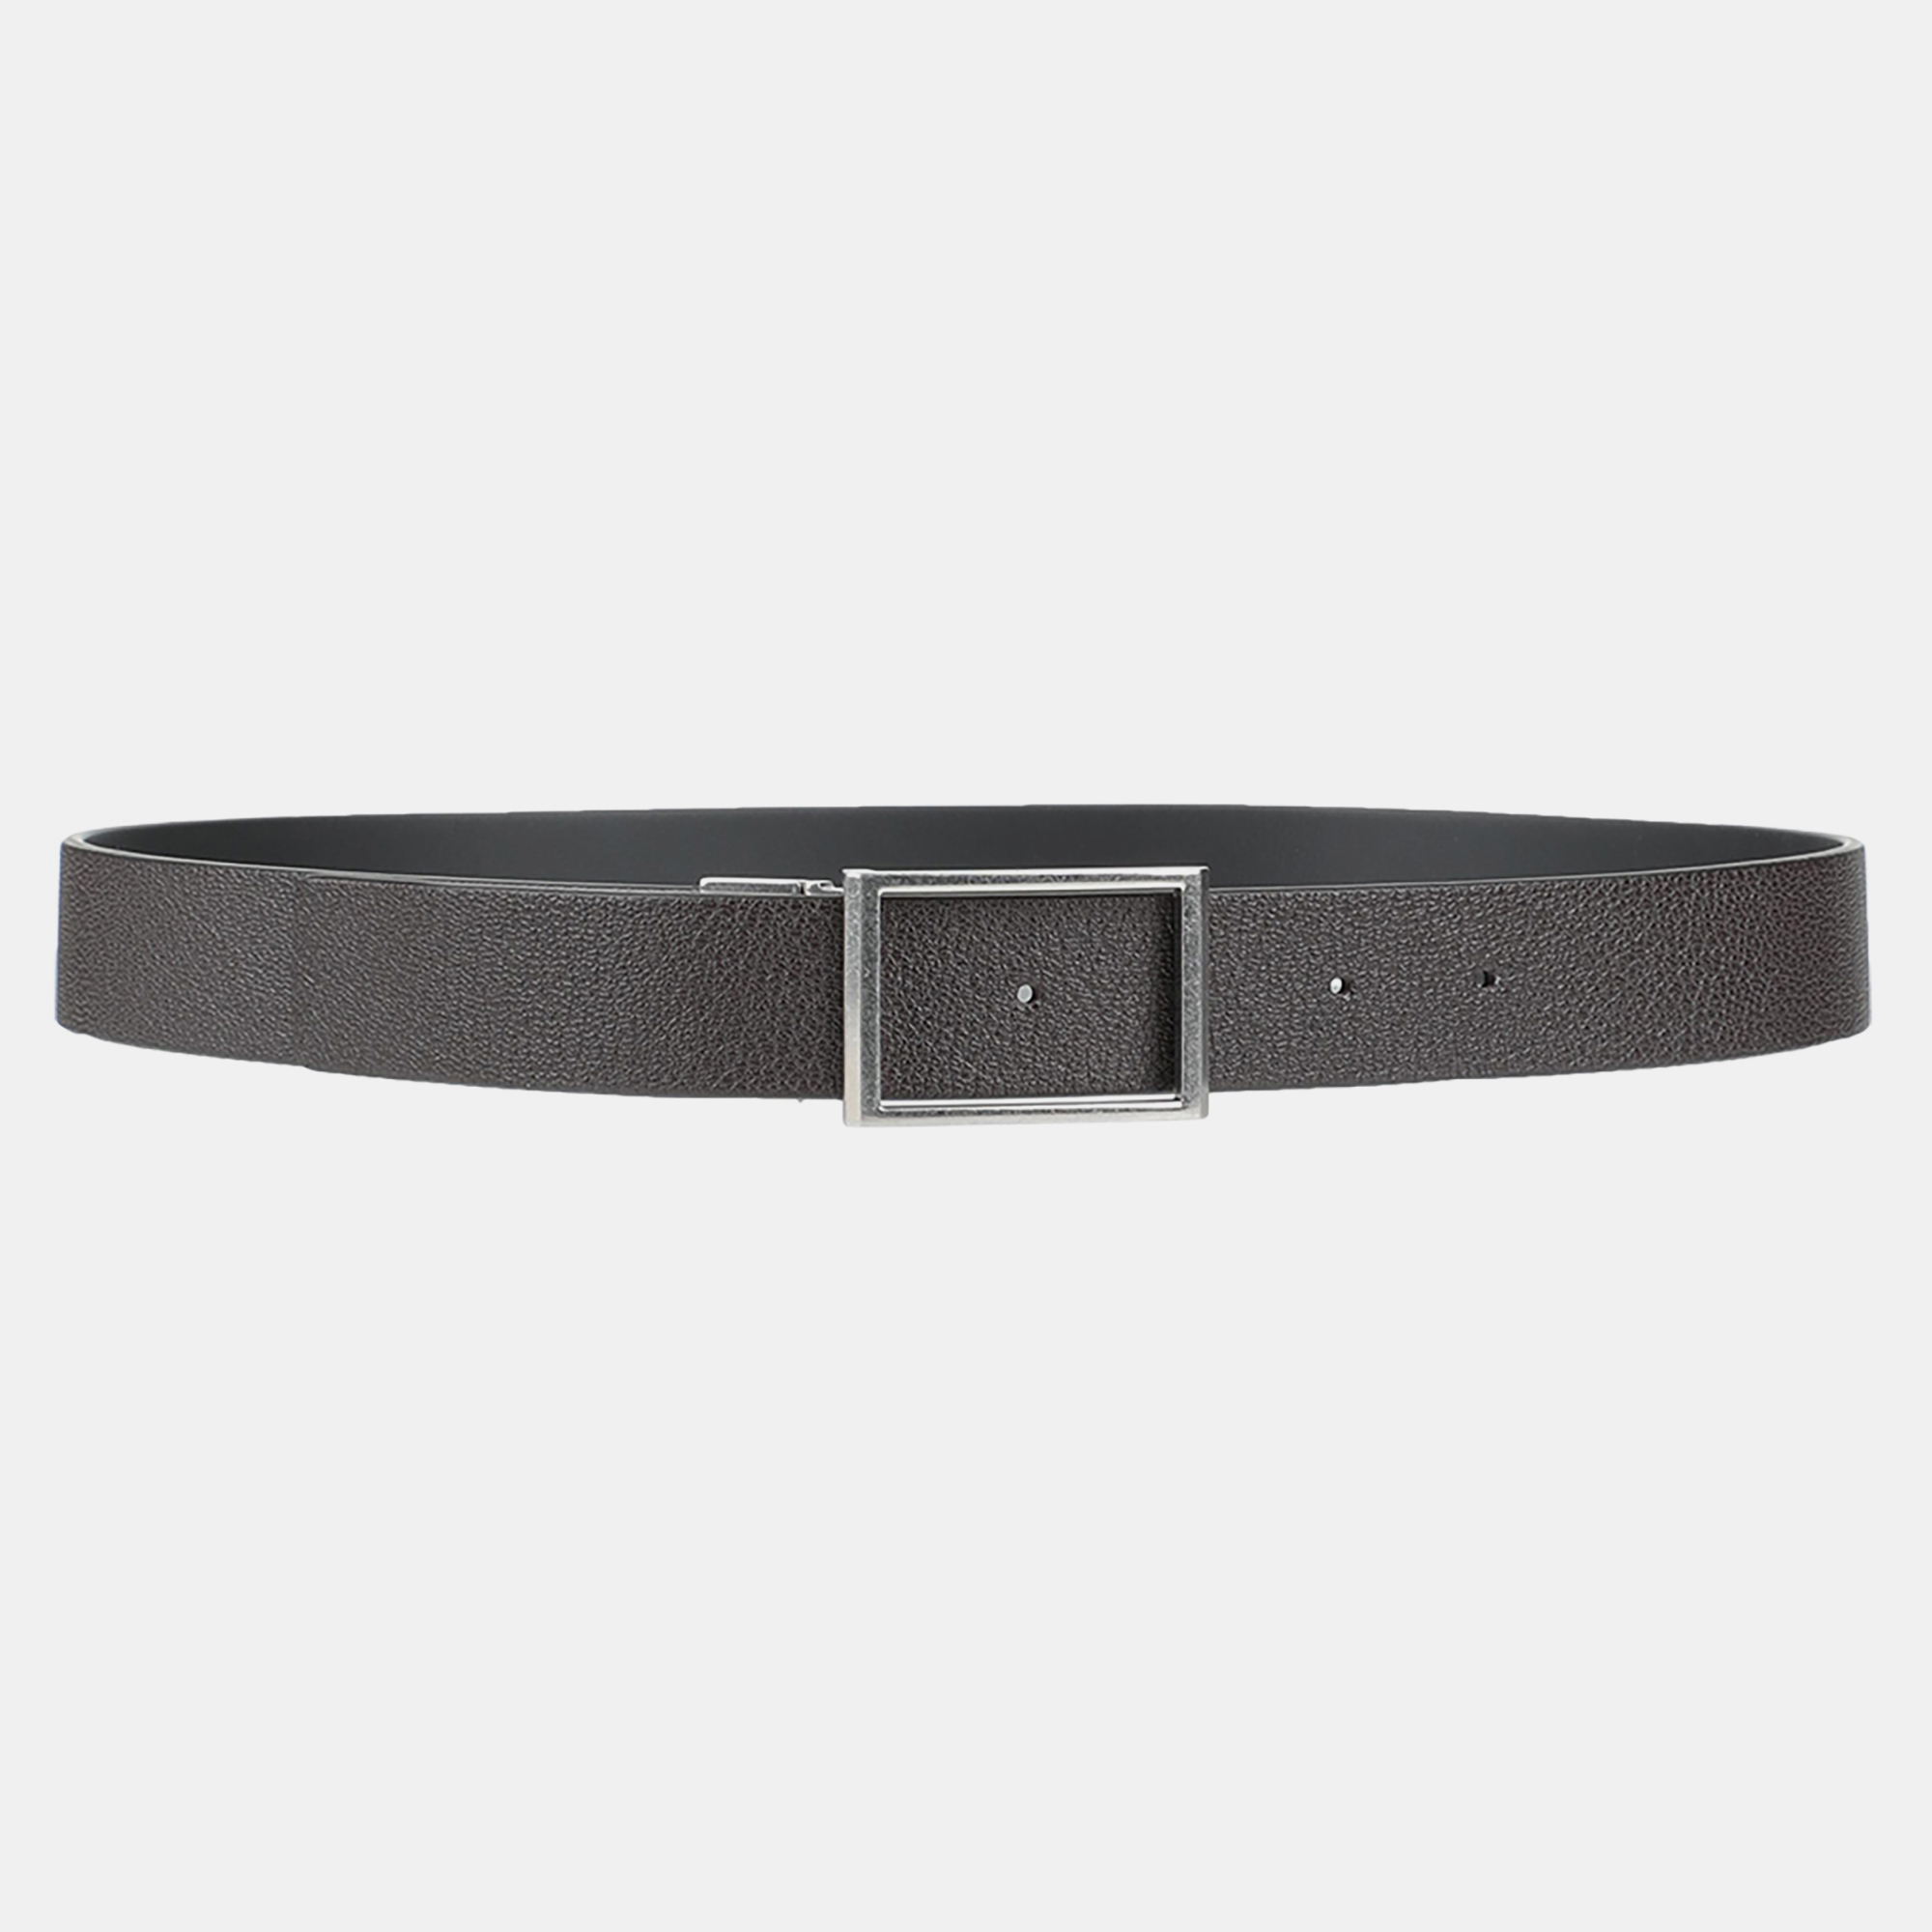 Define your style with this impeccably designed designer belt blending functionality with fashion. Crafted from premium materials and featuring intricate detailing it adds a touch of refinement to any ensemble ensuring you stand out with every step.